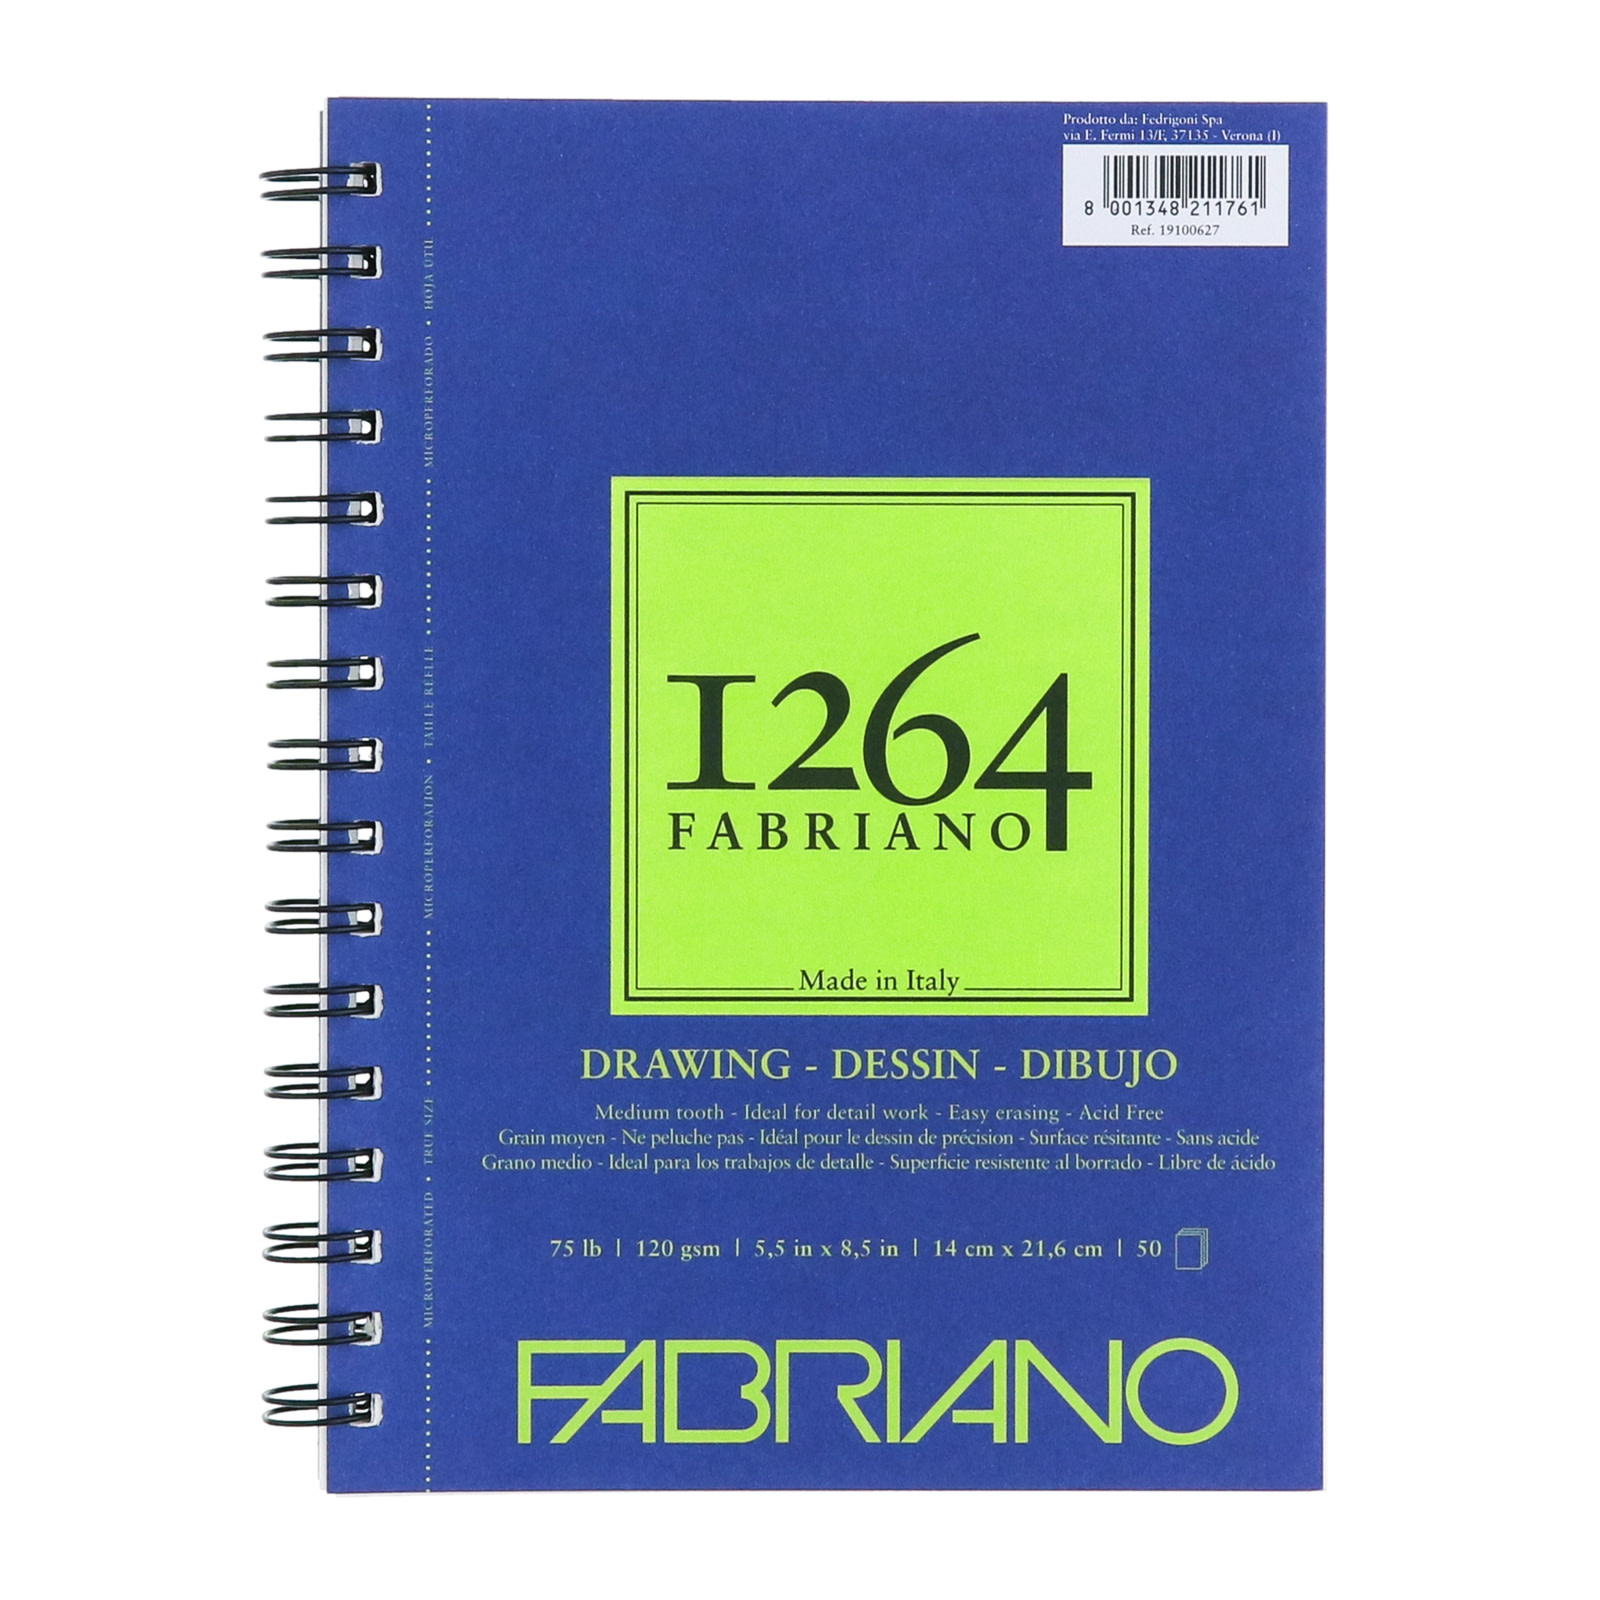 Fabriano 1264 Drawing Pads, 5.5" x 8.5"